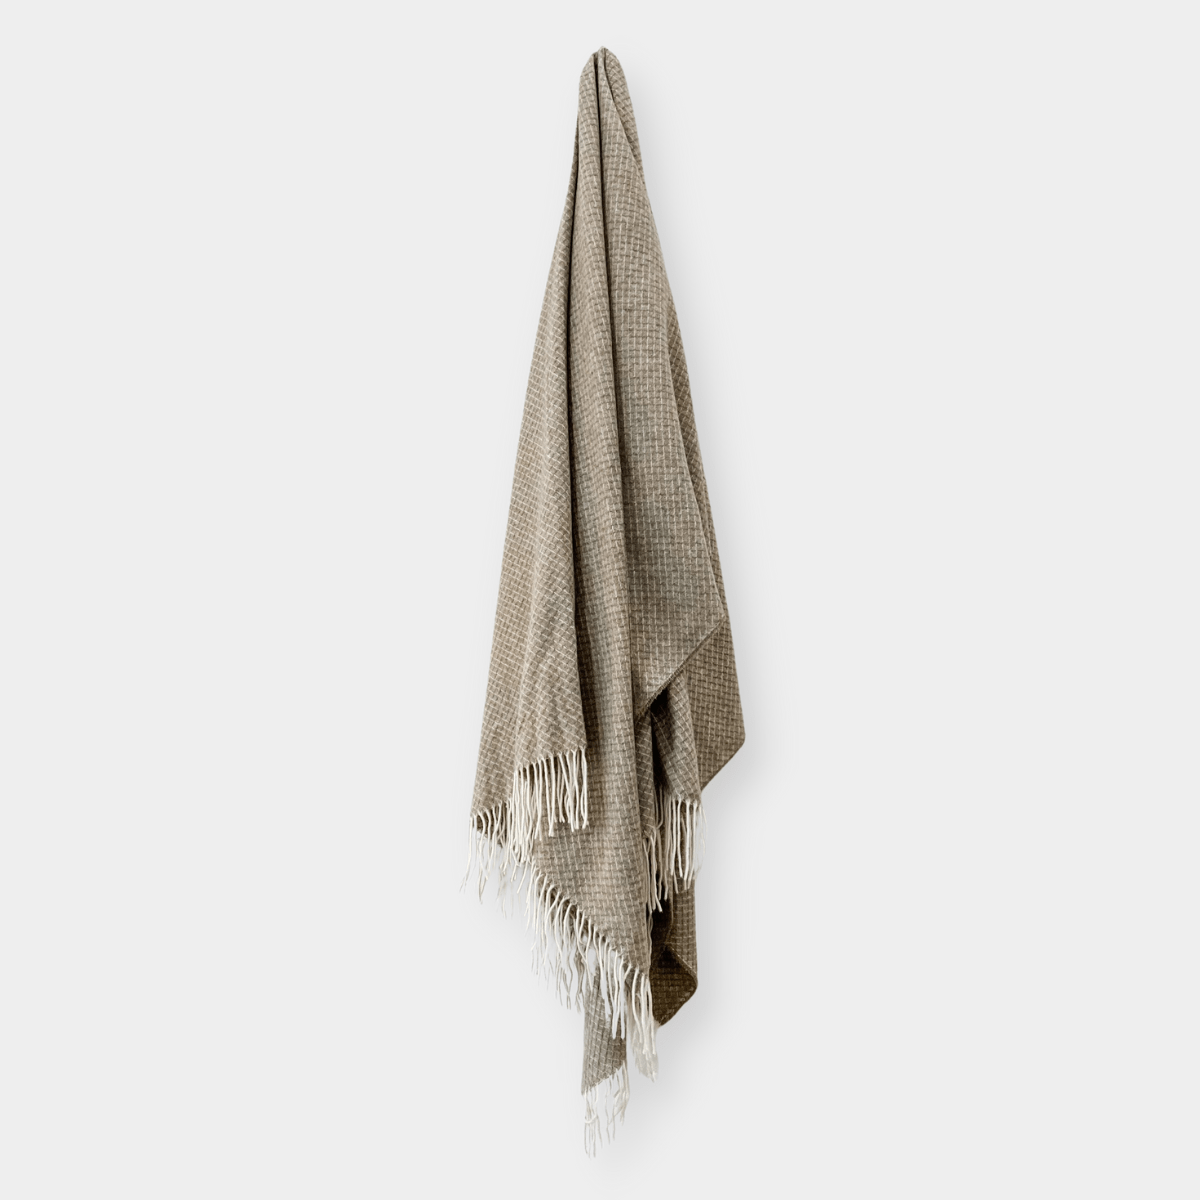 CODU Blankets & Throws Chiswick Collection Throw Blanket, Mocha (6067283132604)